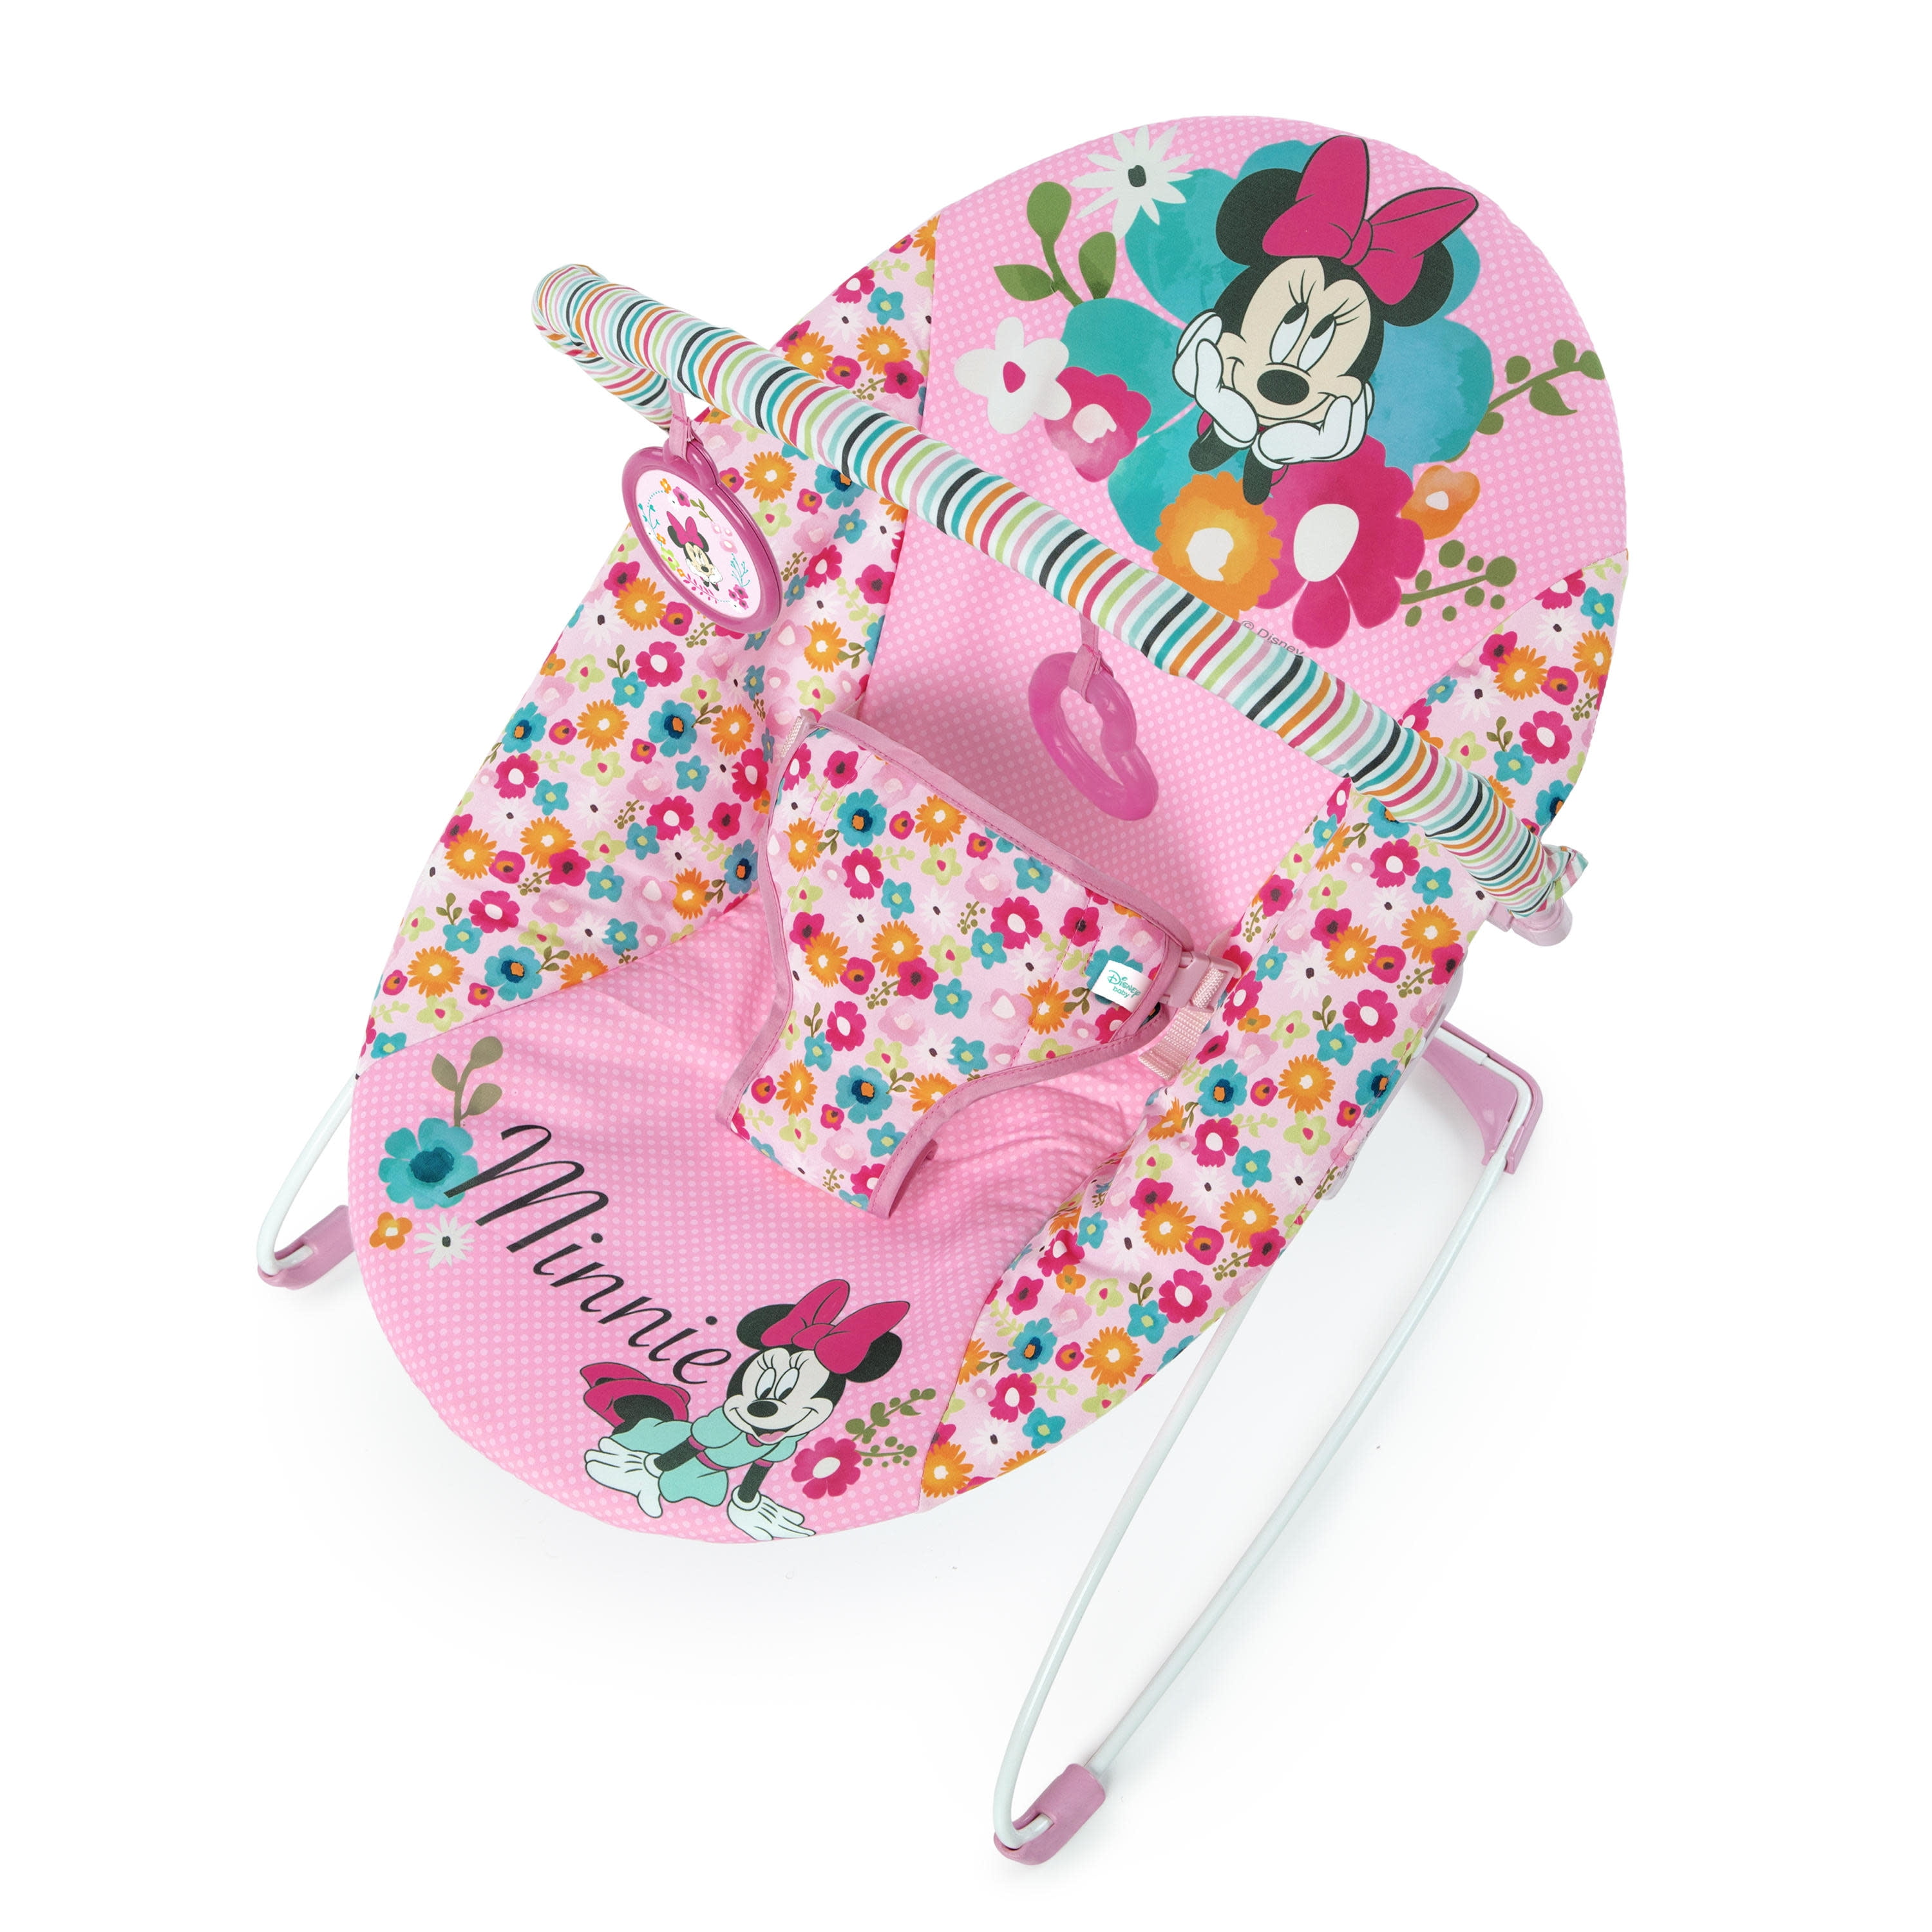 minnie mouse baby rocker